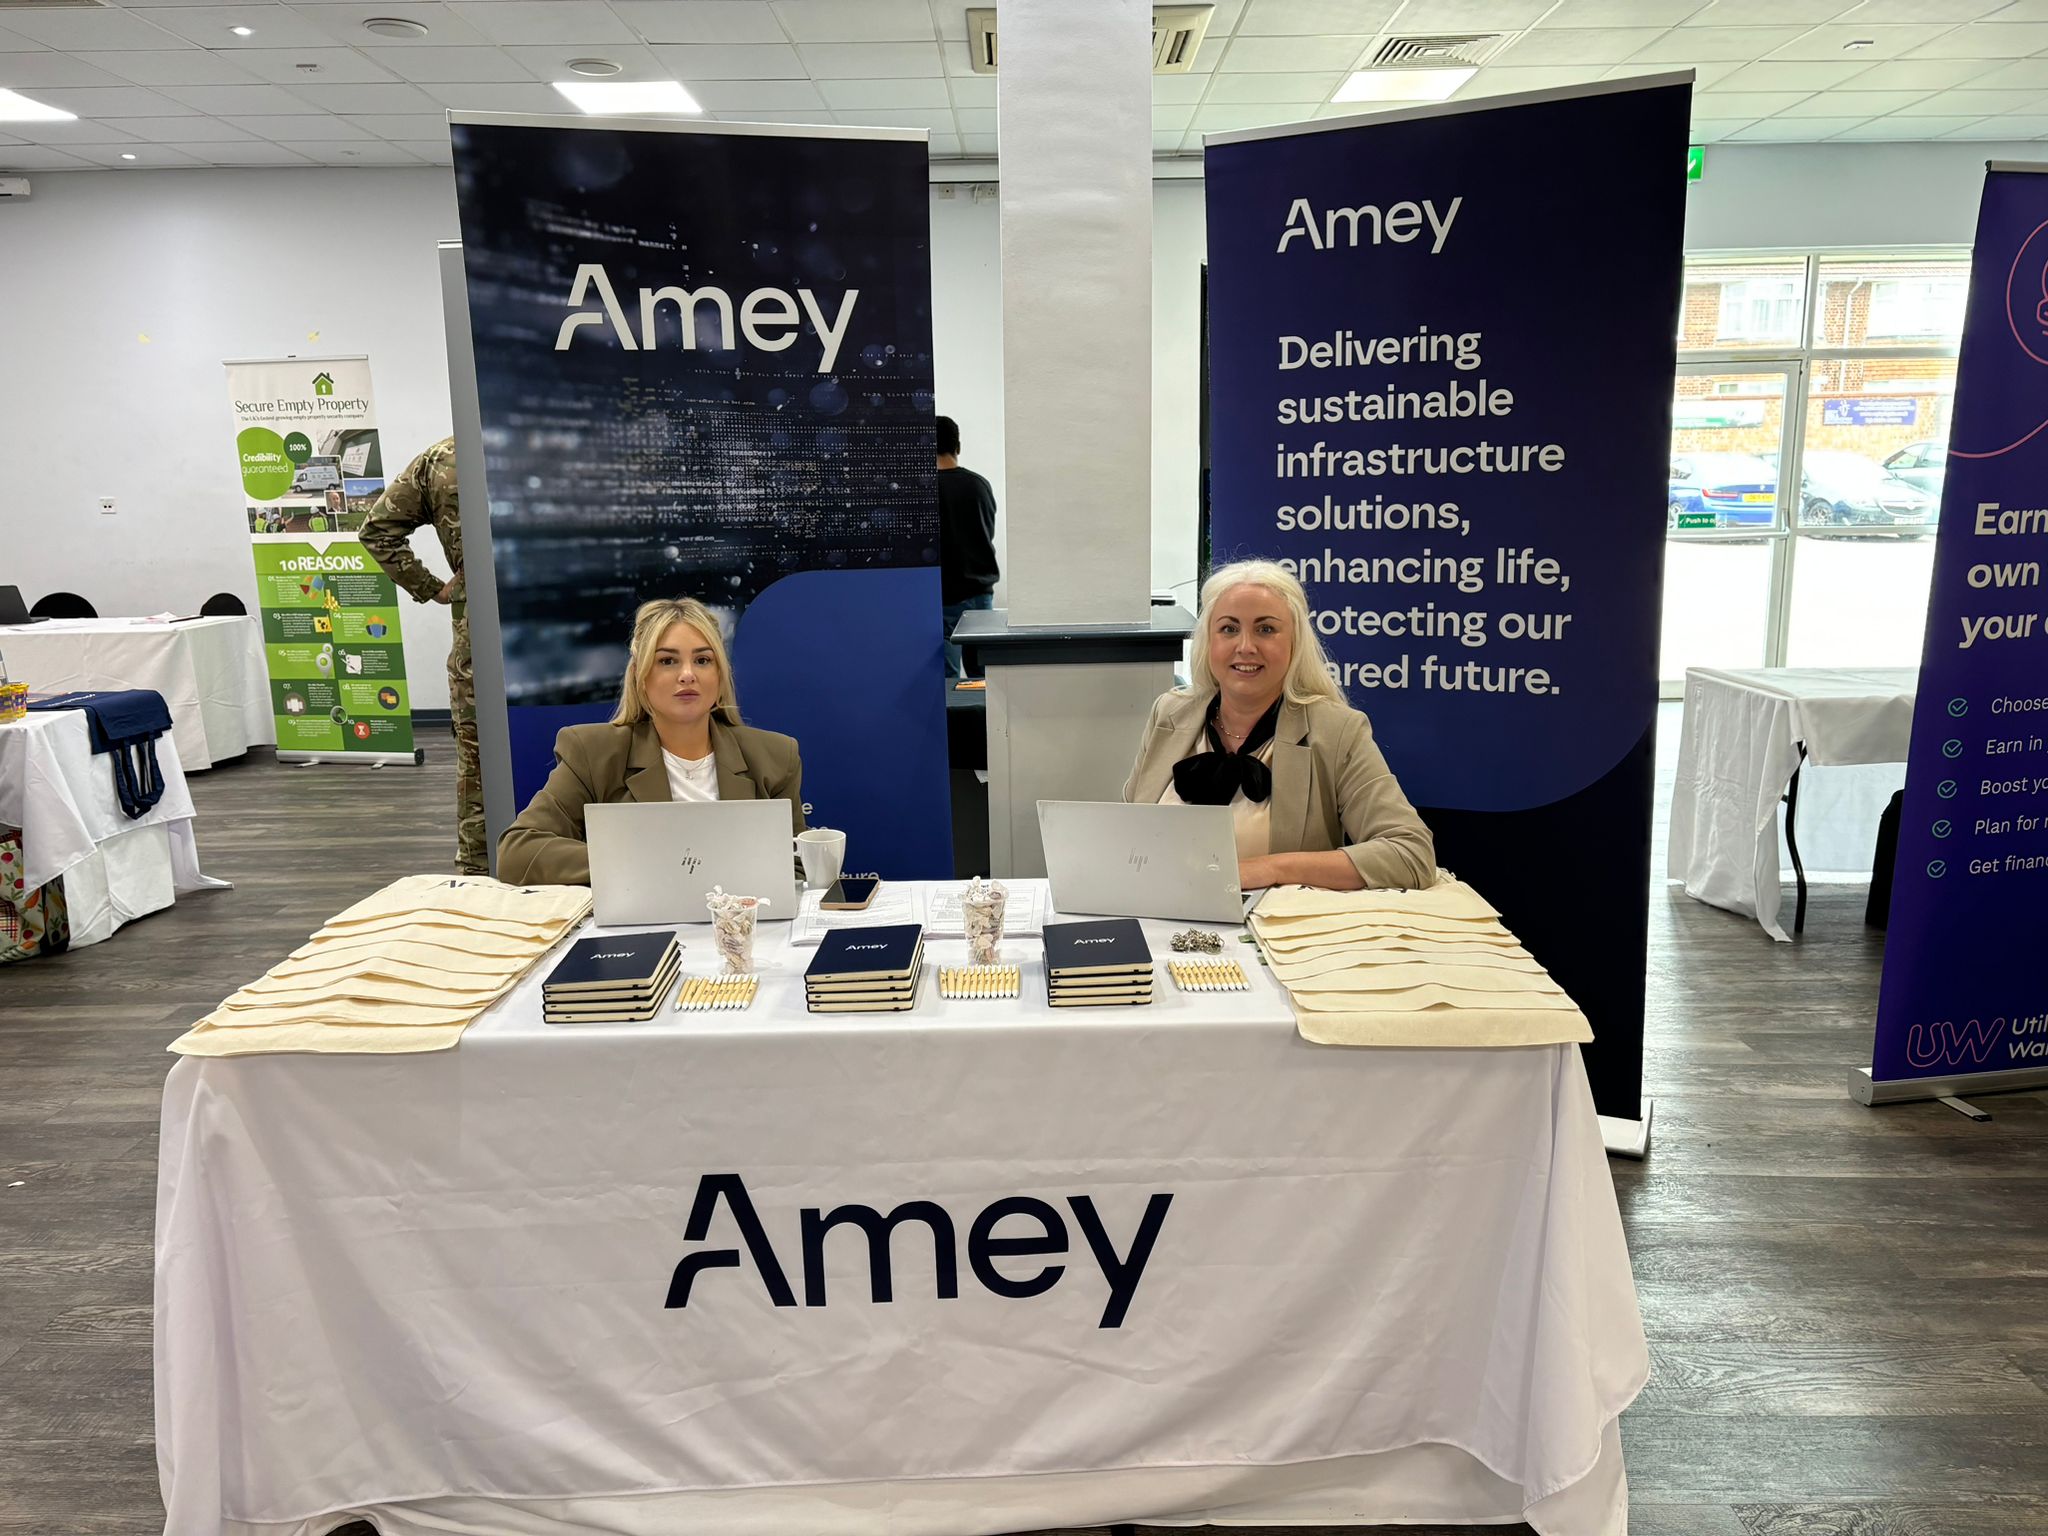 Amey at our event in Northampton